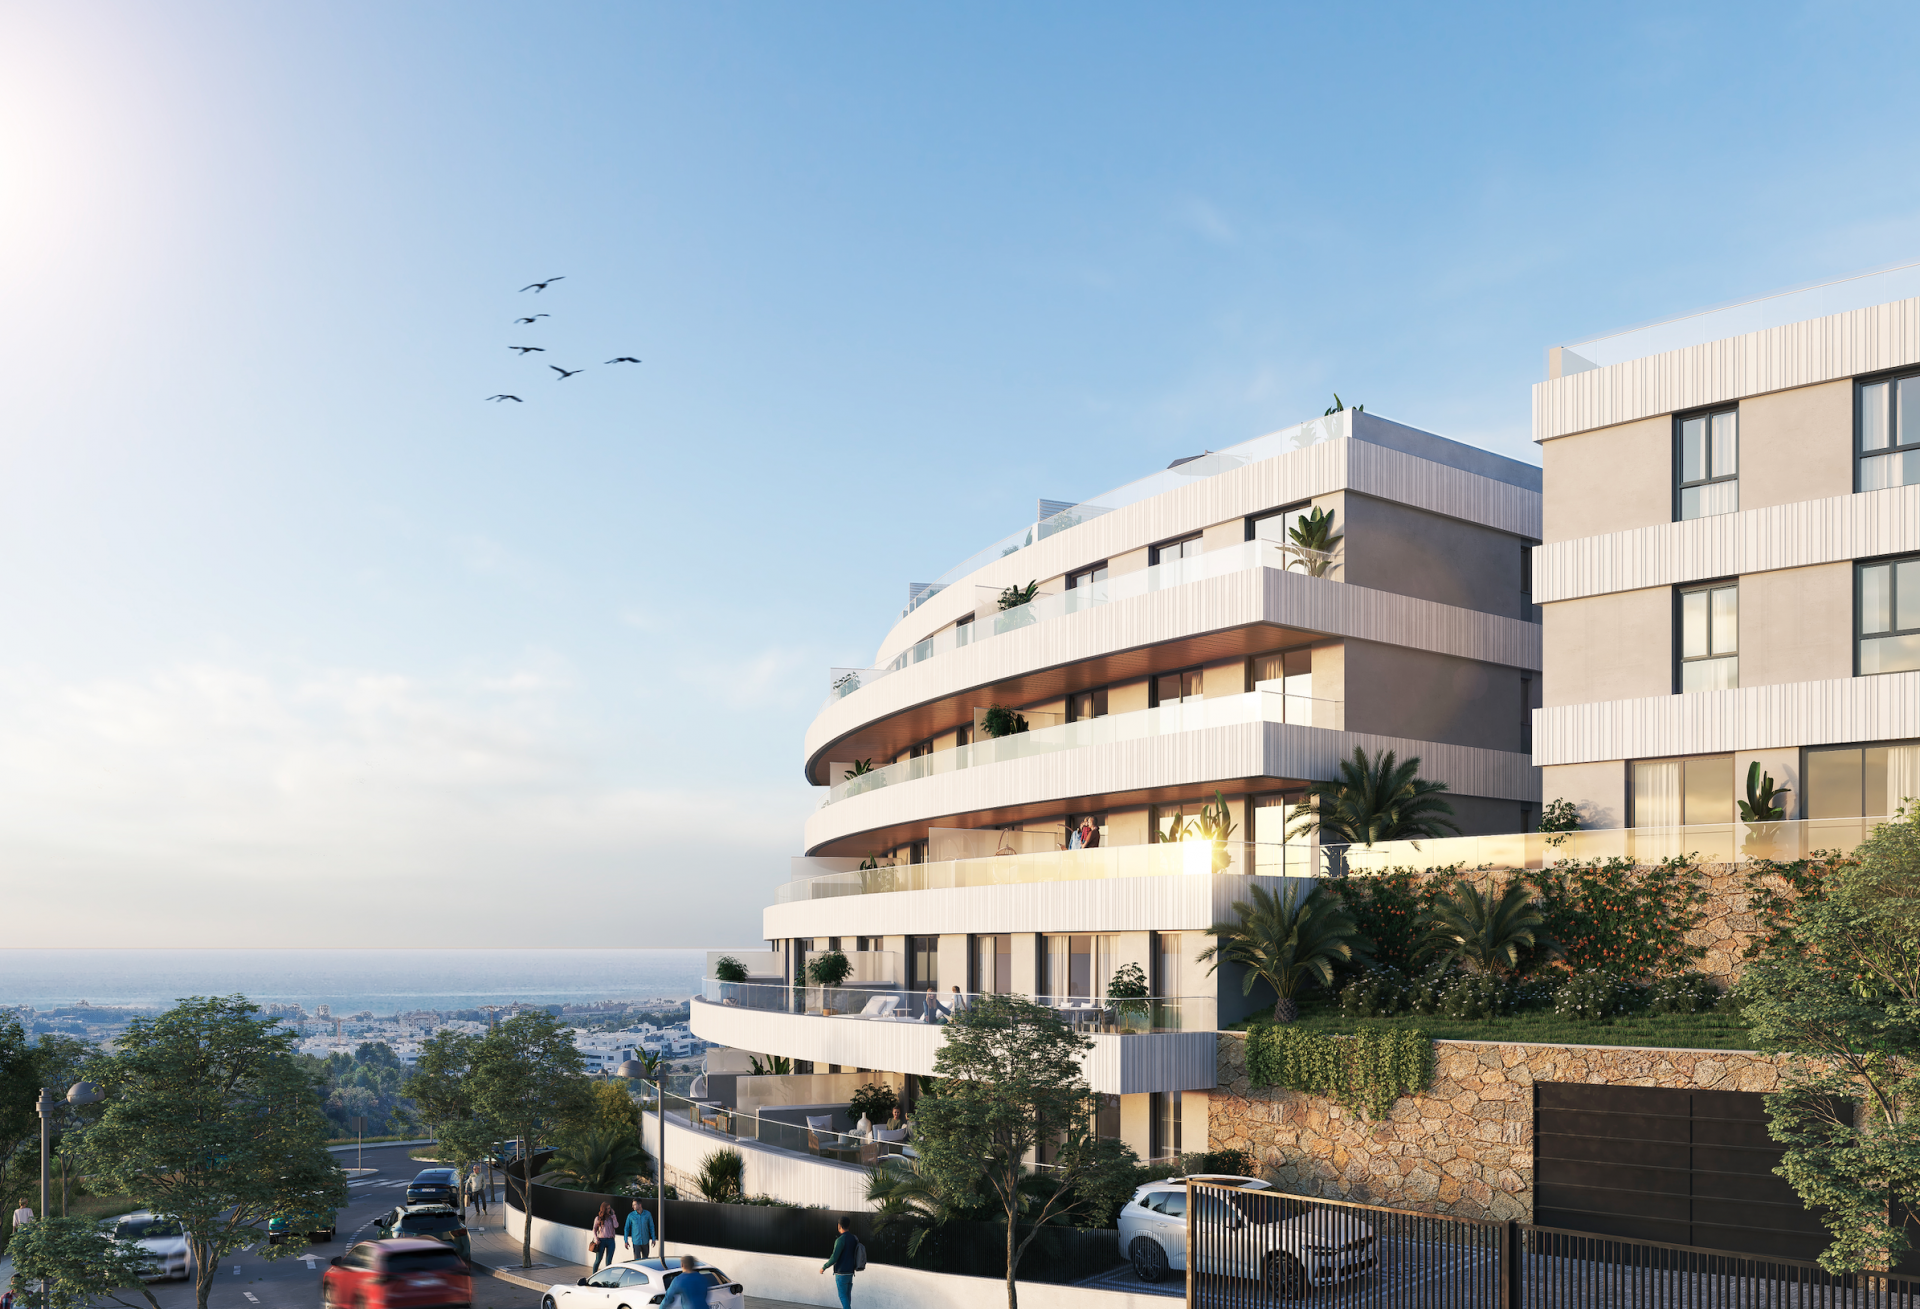 New complex under construction in an elevated position providing privileged views of the coastline and the sea